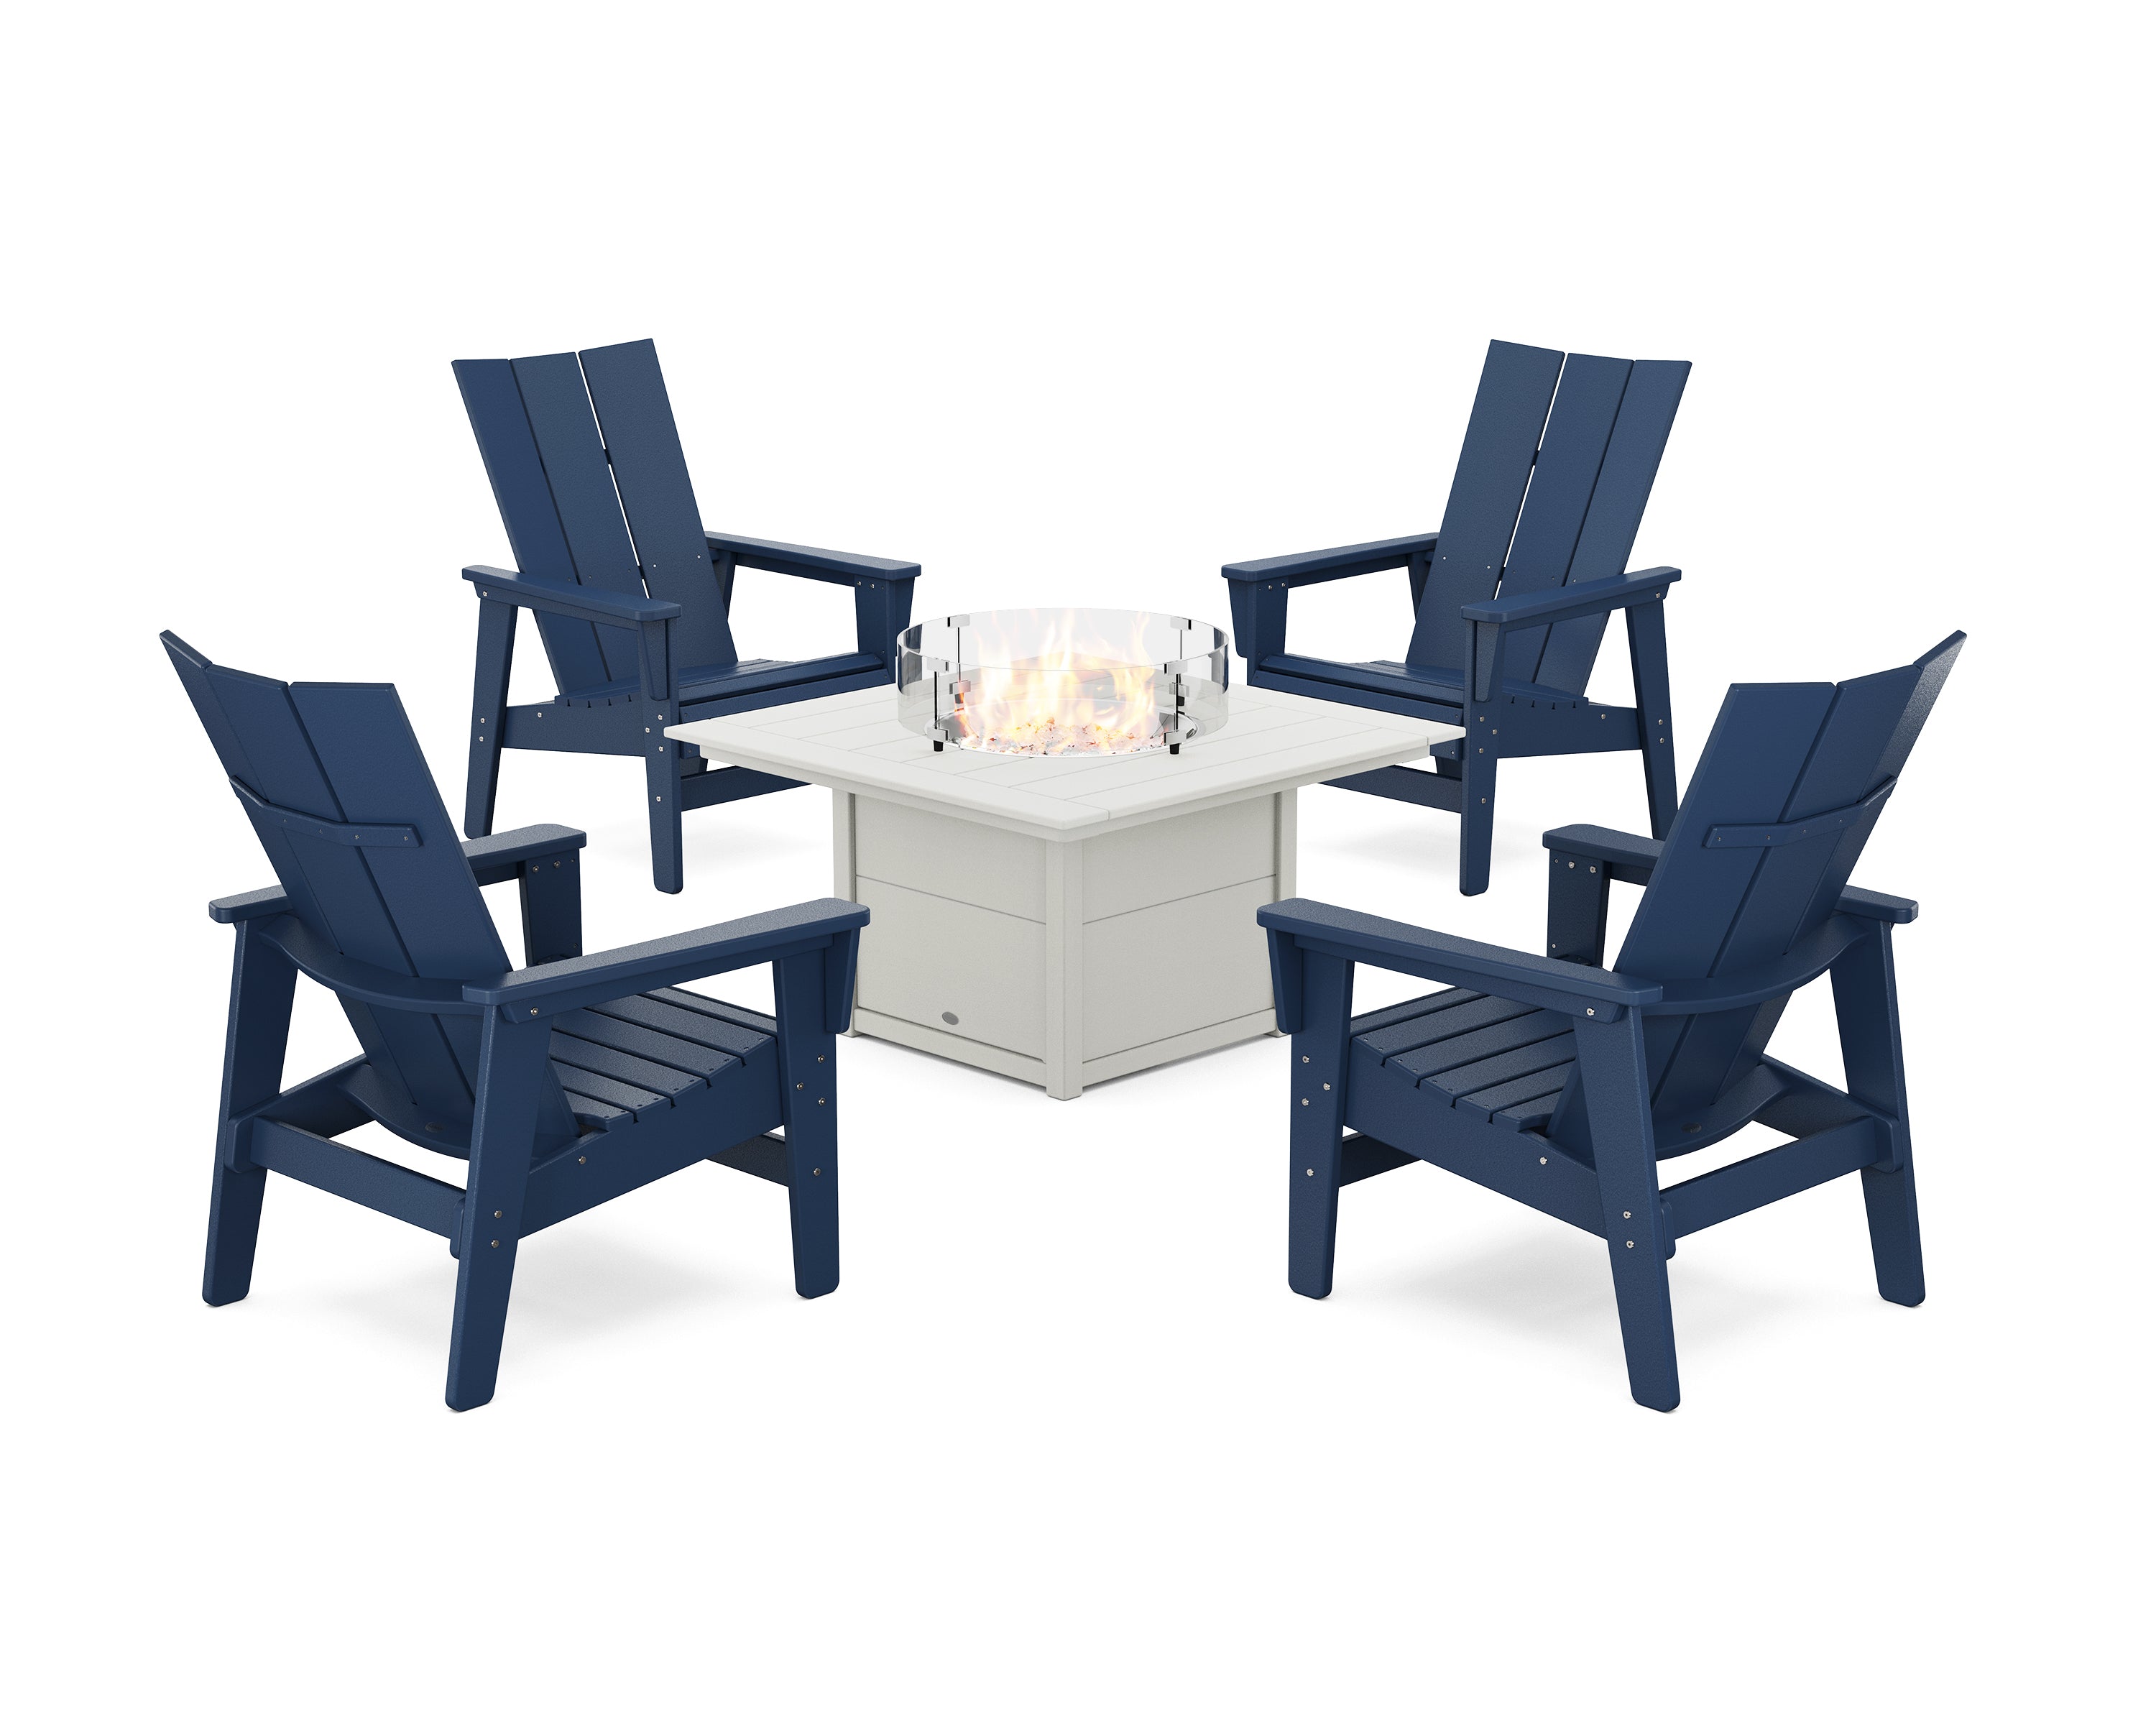 POLYWOOD® 5-Piece Modern Grand Upright Adirondack Conversation Set with Fire Pit Table in Navy / White